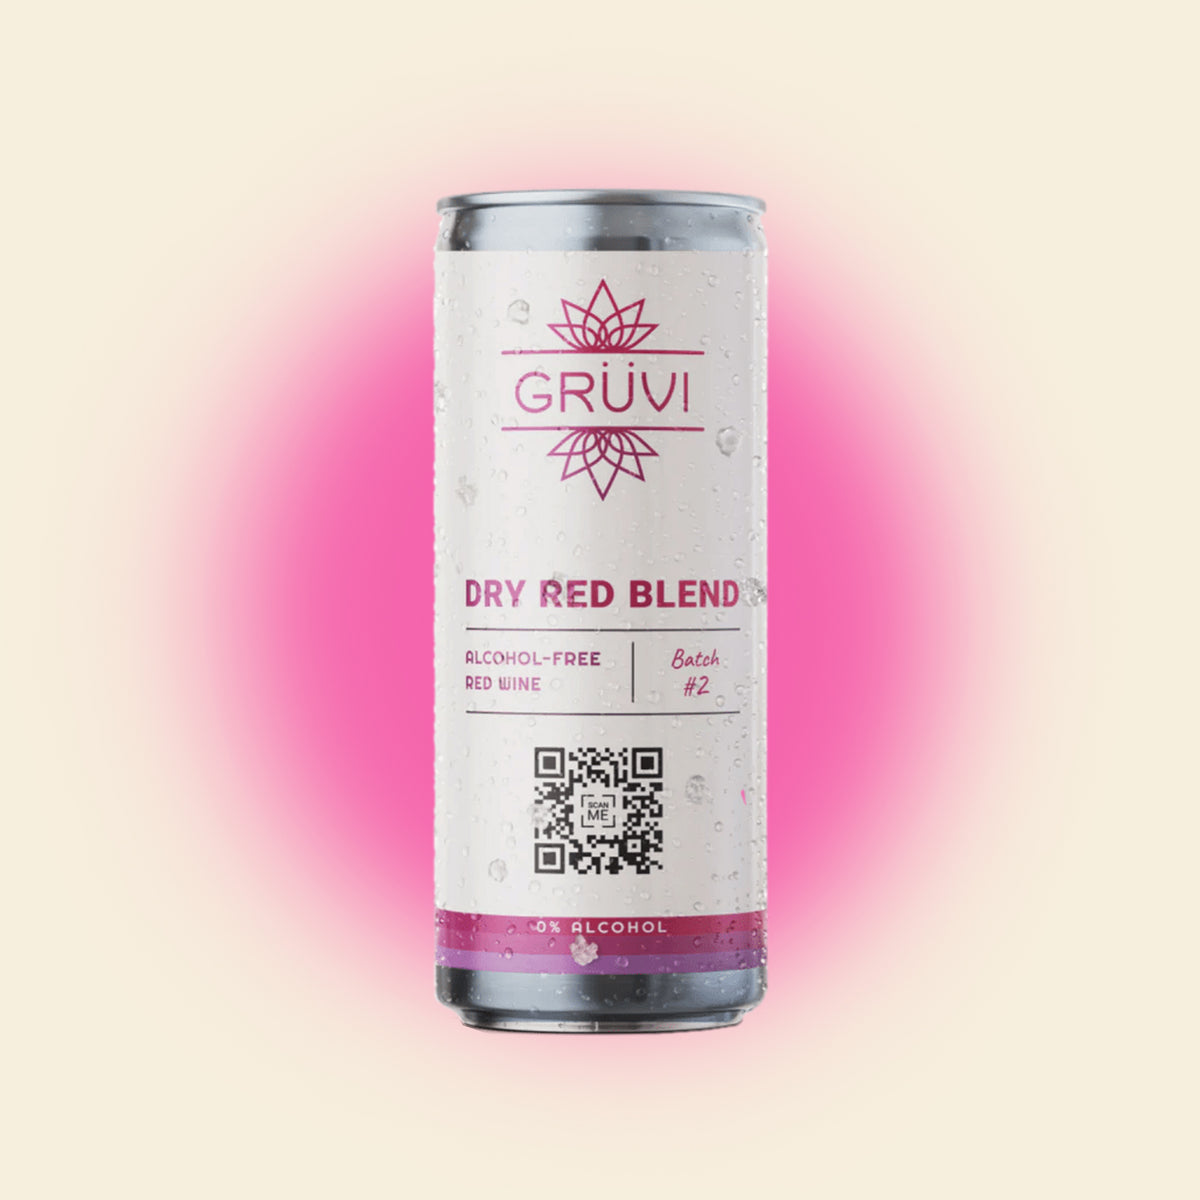 Gruvi Dry Red Blend Nonalcoholic Wine